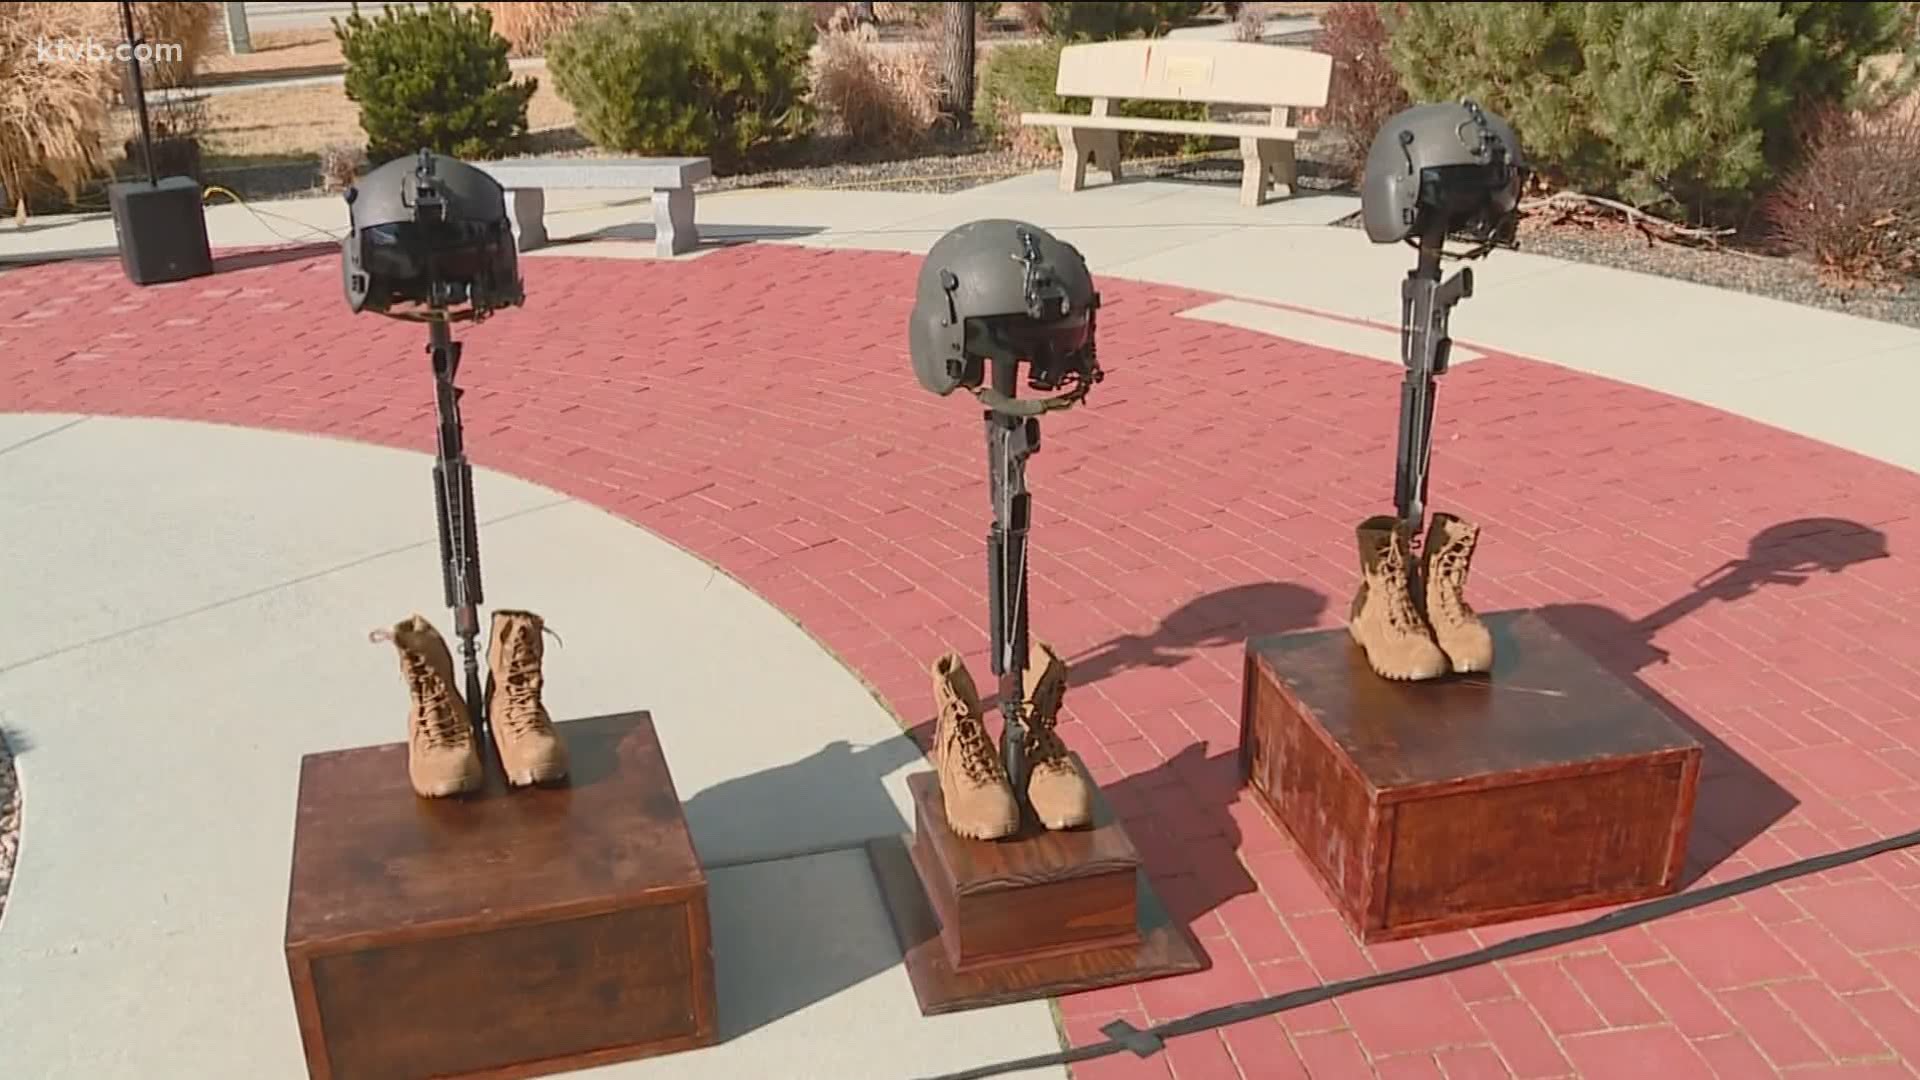 A memorial service was held at Gowen Field Tuesday to honor the three men killed in a Black Hawk helicopter crash last week.